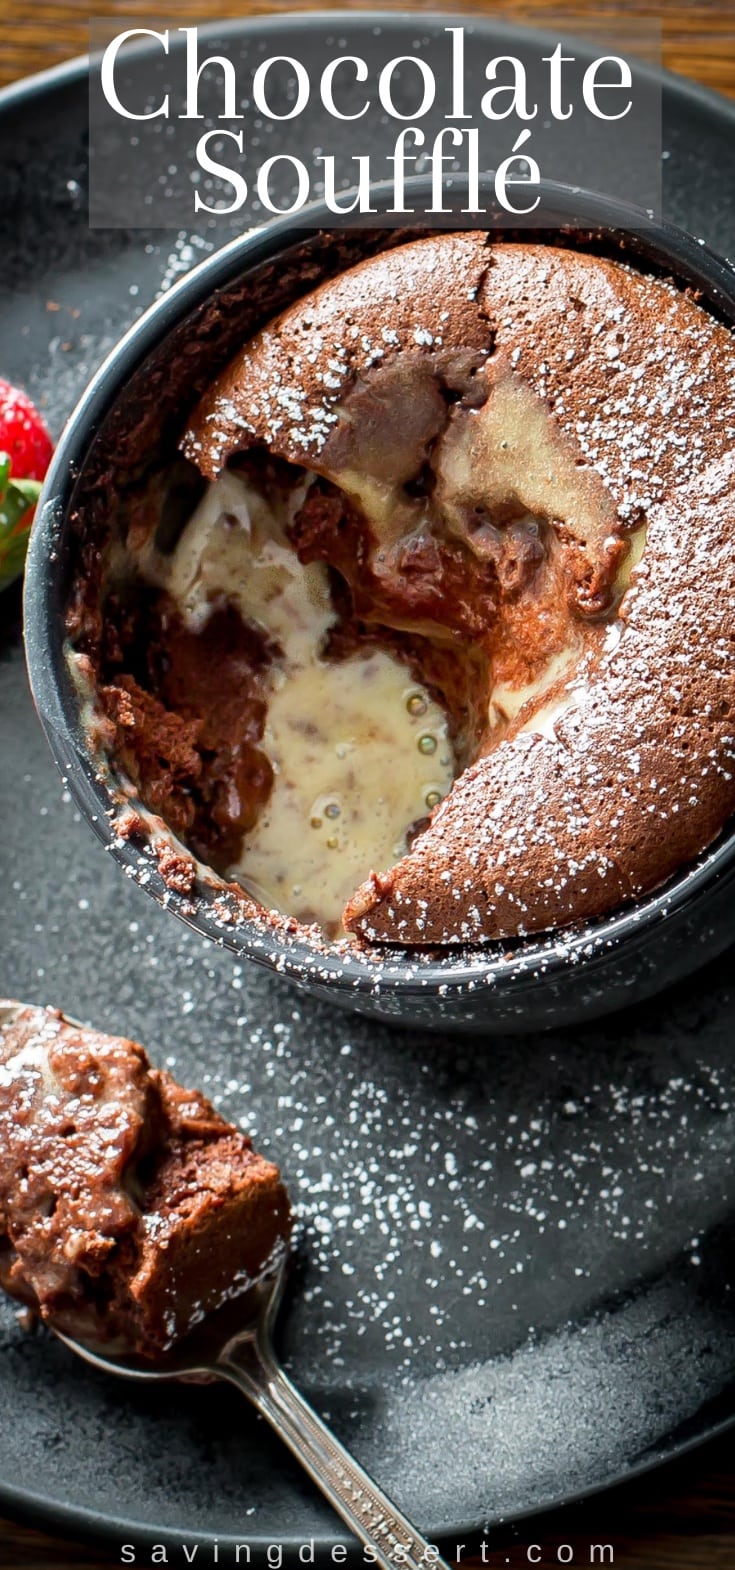 Overhead view of a chocolate soufflé with a creme anglaise sauce on top